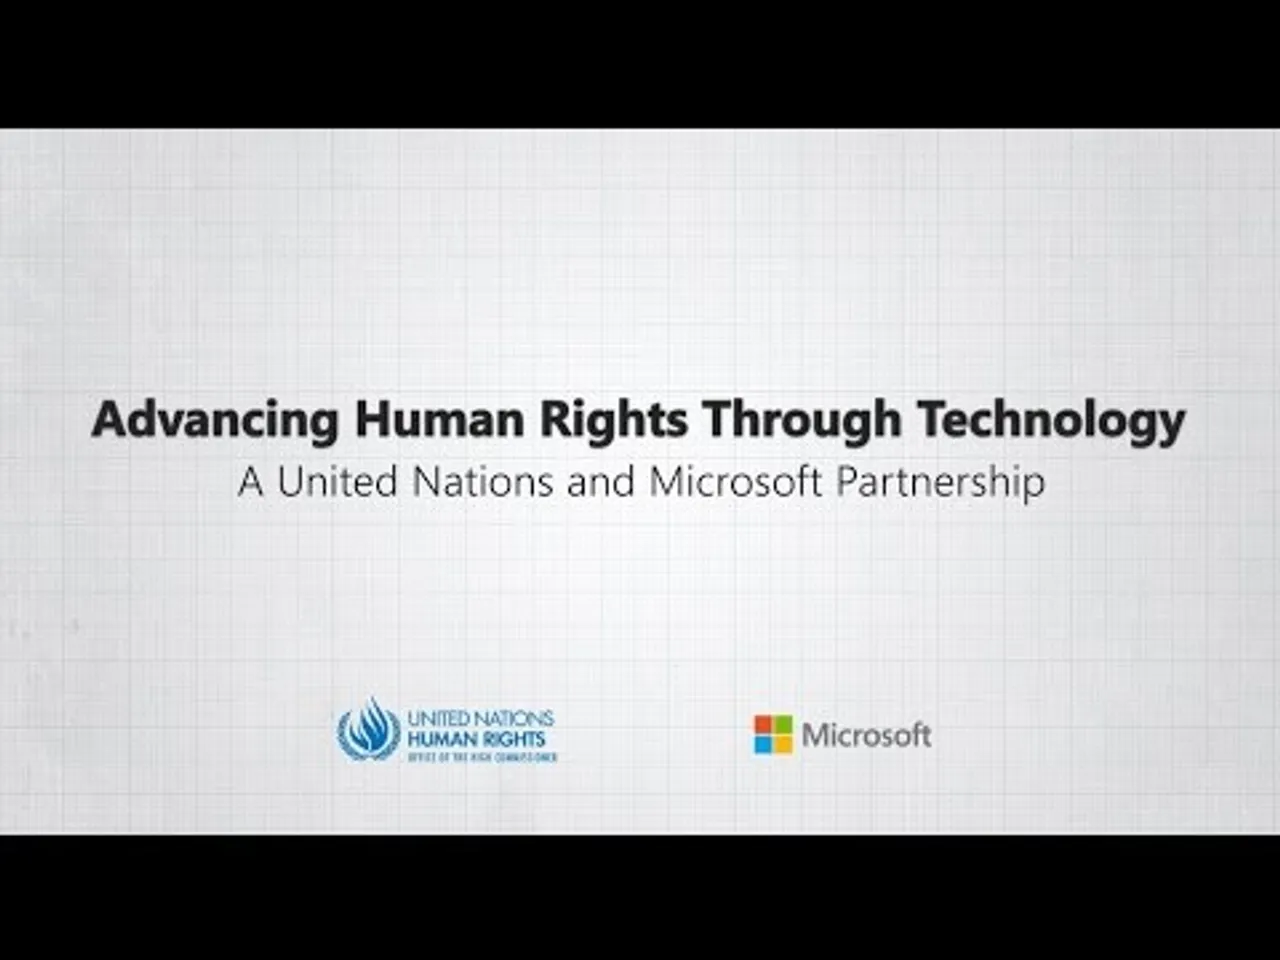 The UN Human Rights Office